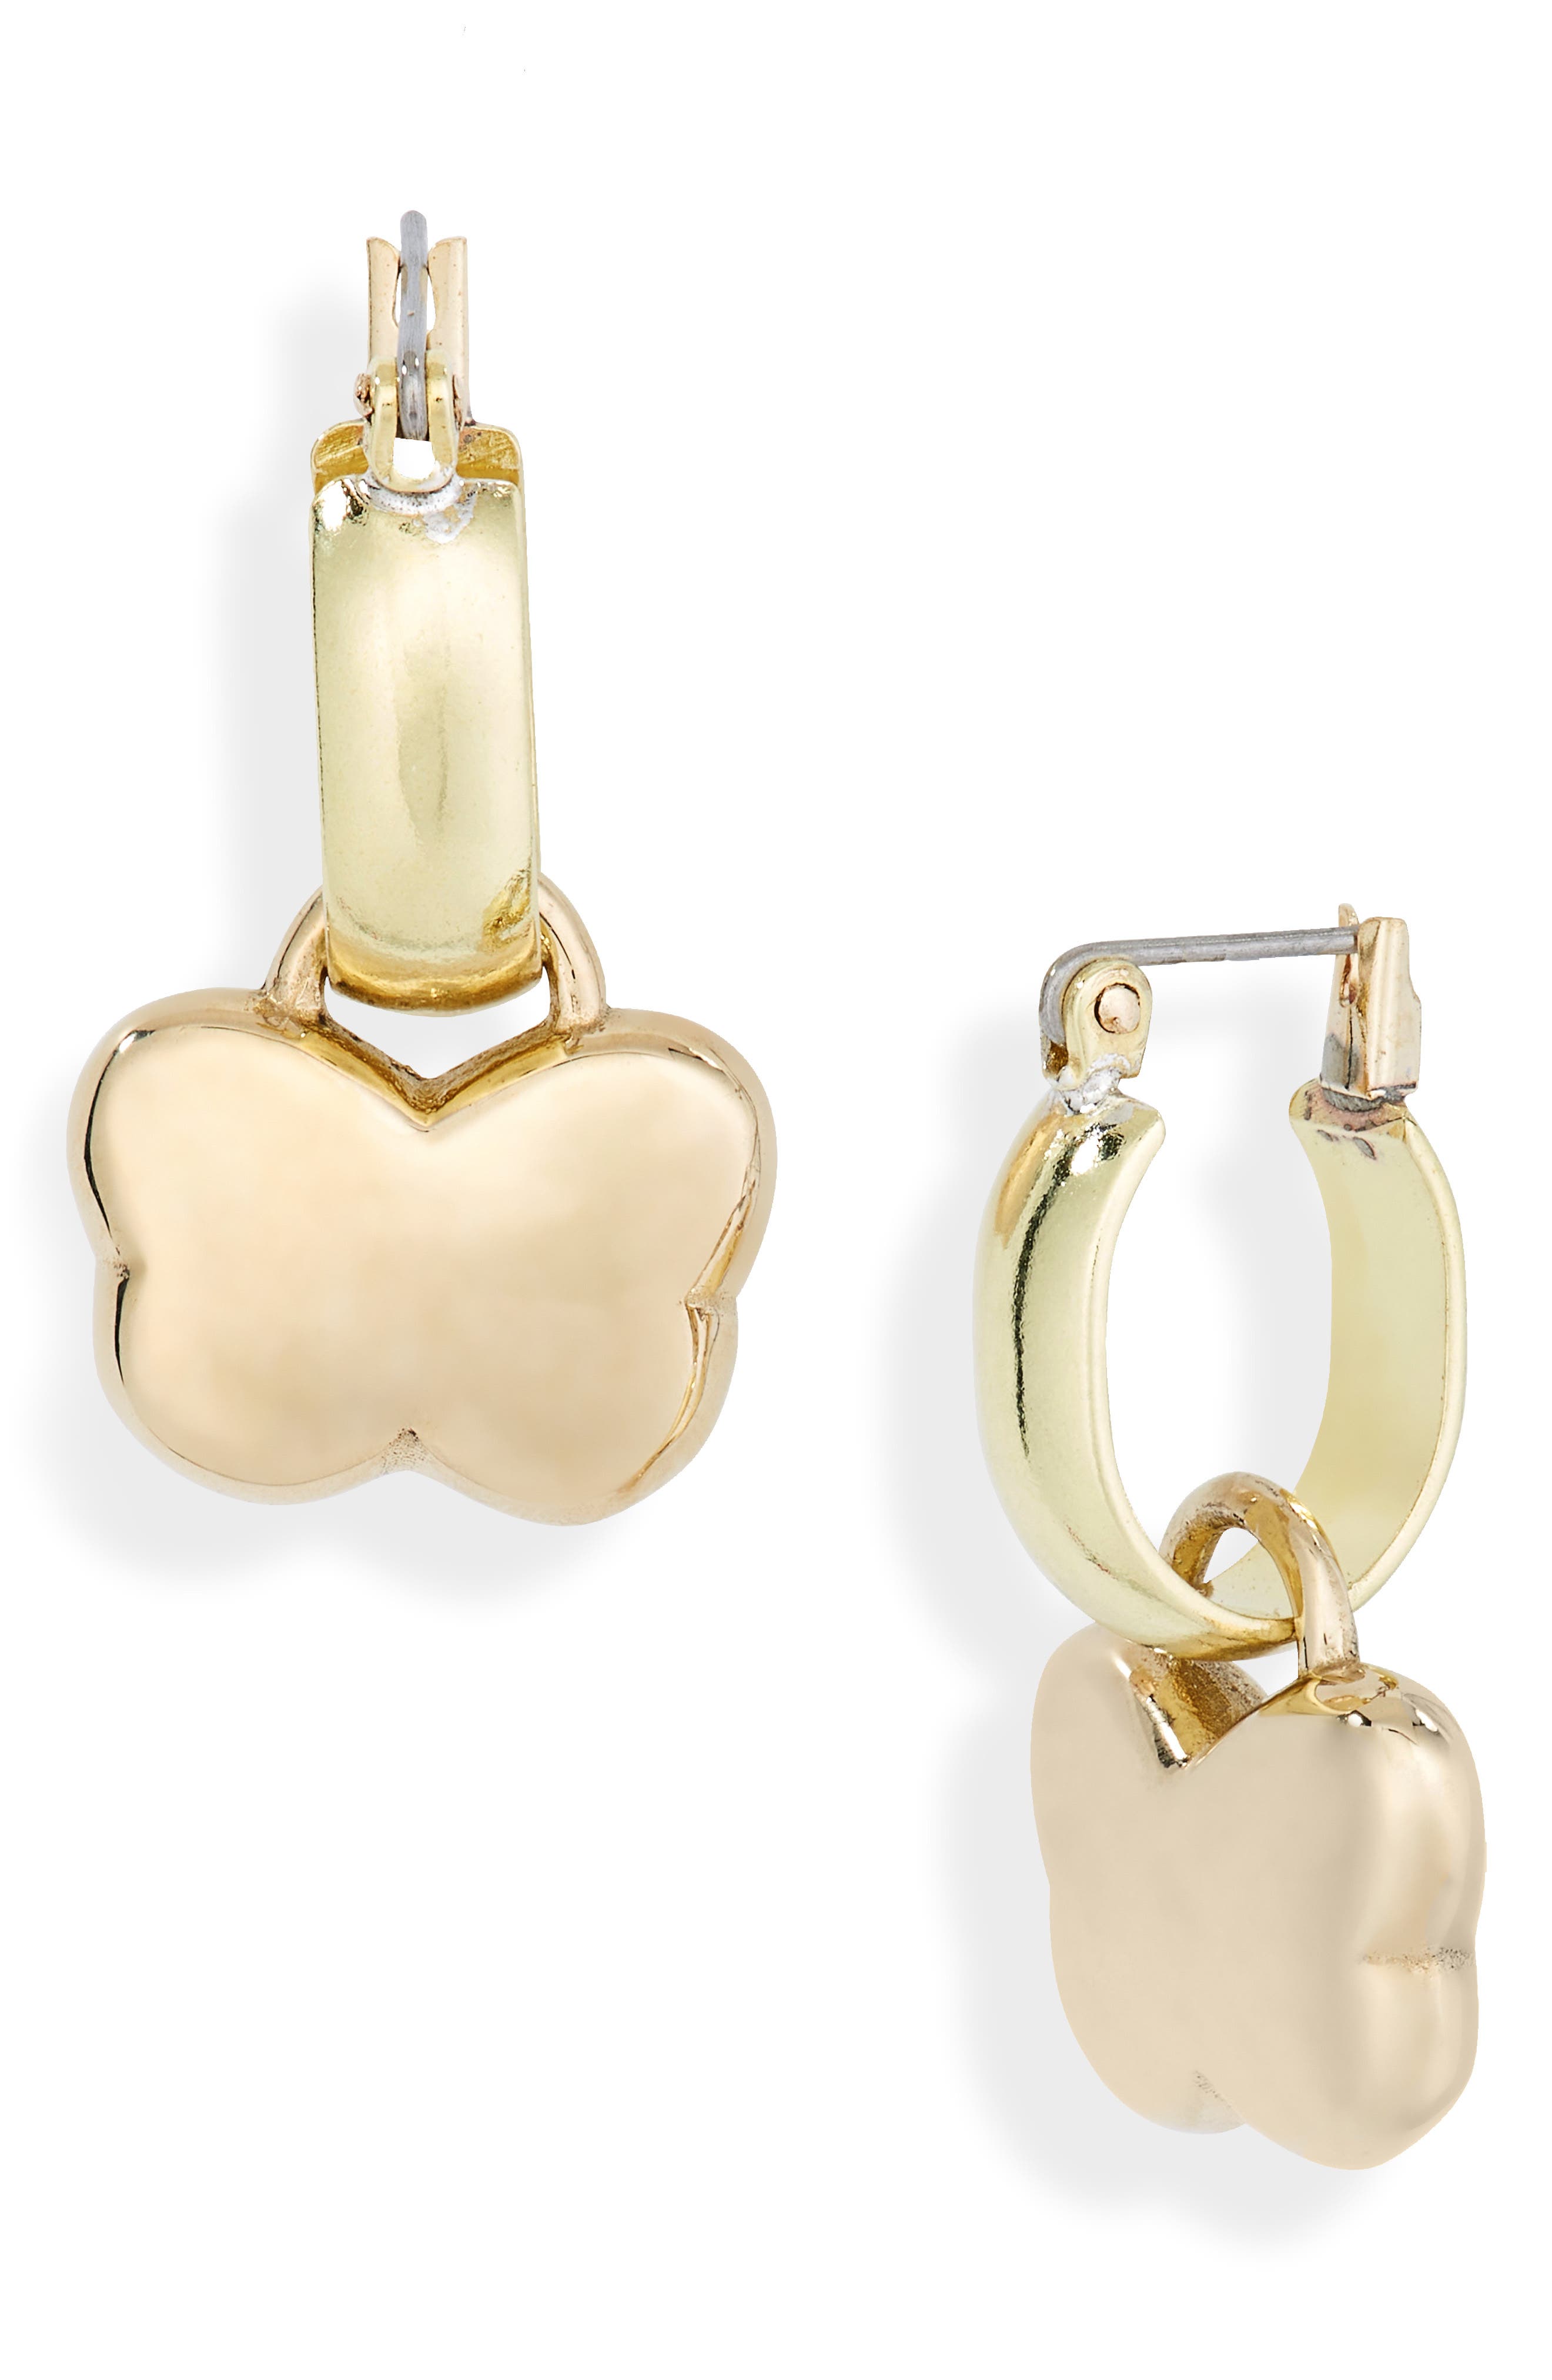 Laura Lombardi Maia Butterfly Charm Hoop Earrings in Raw Brass 14Kt Gold at Nordstrom